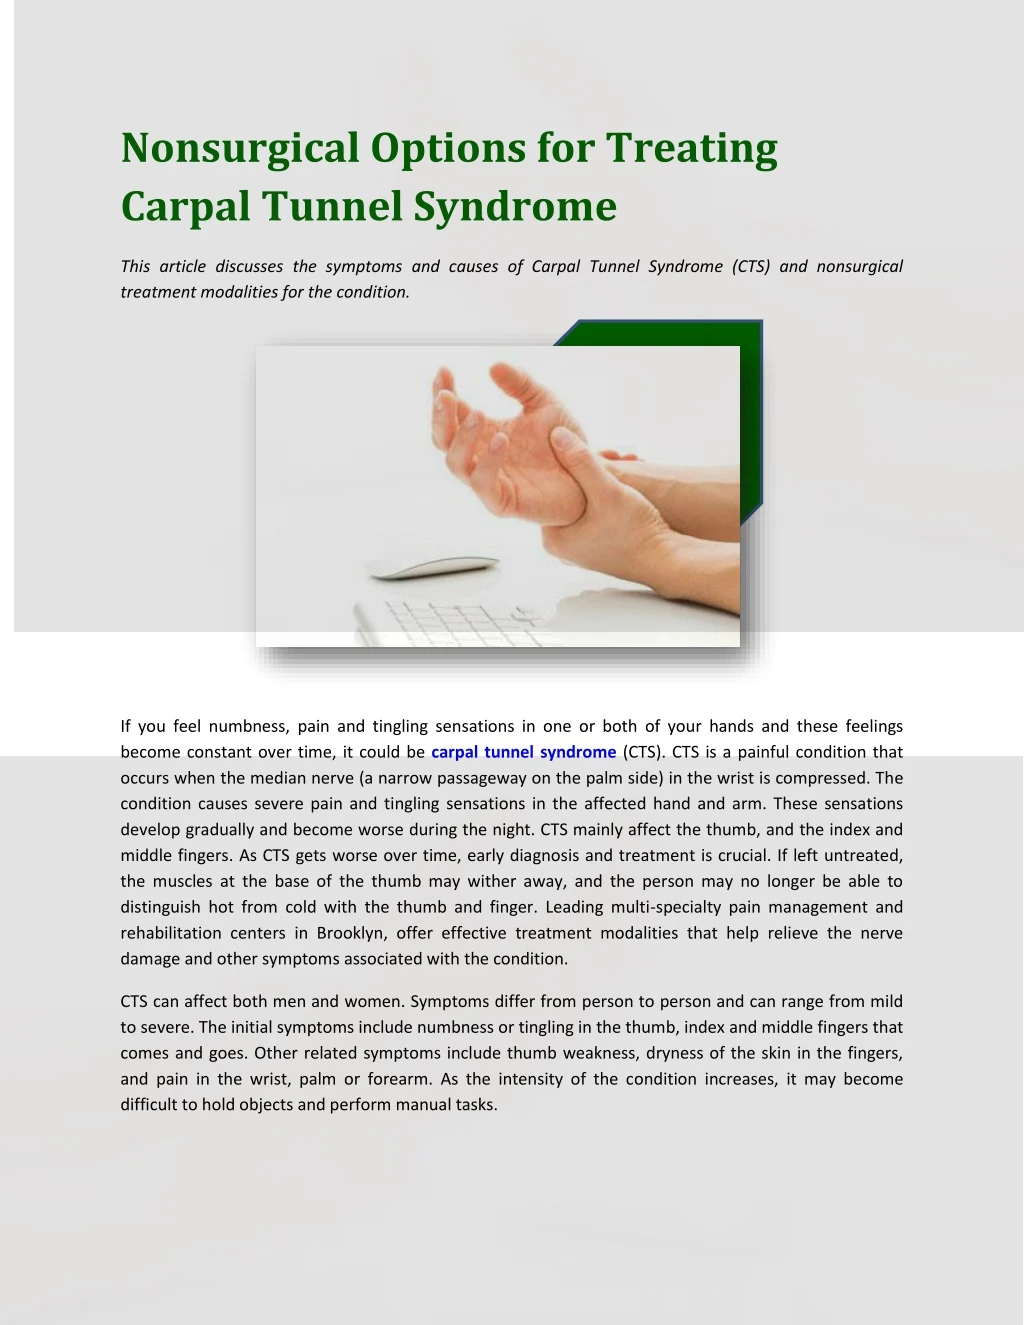 nonsurgical options for treating carpal tunnel